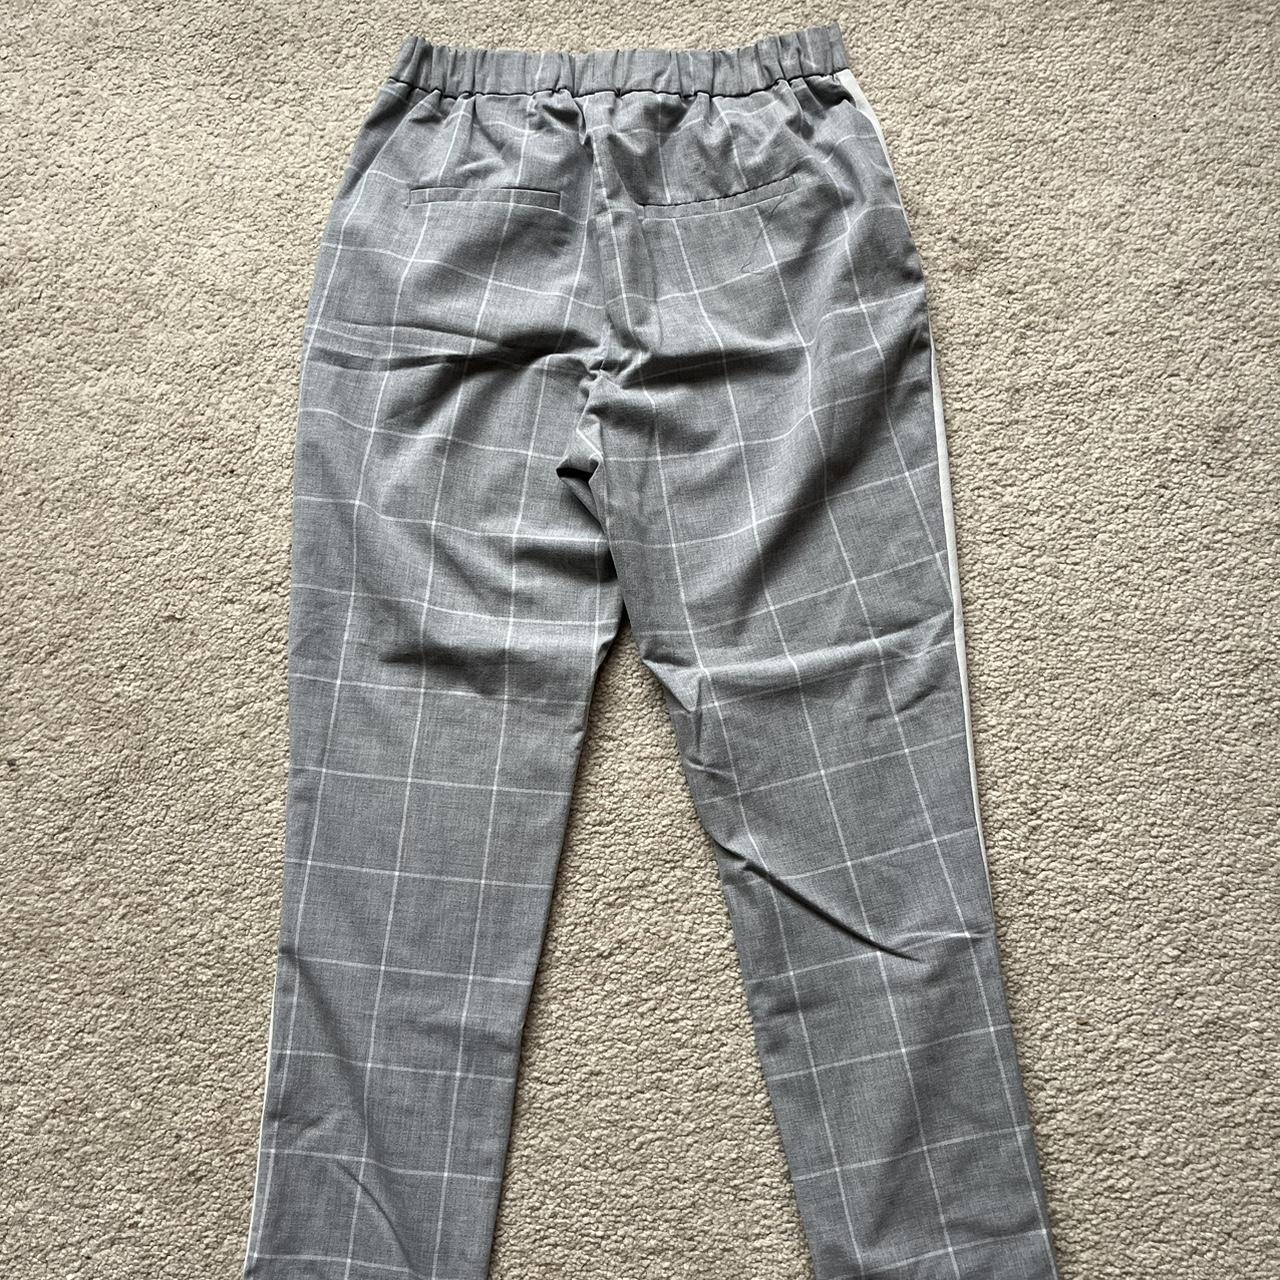 ASOS grey and white checkered trousers with white... - Depop